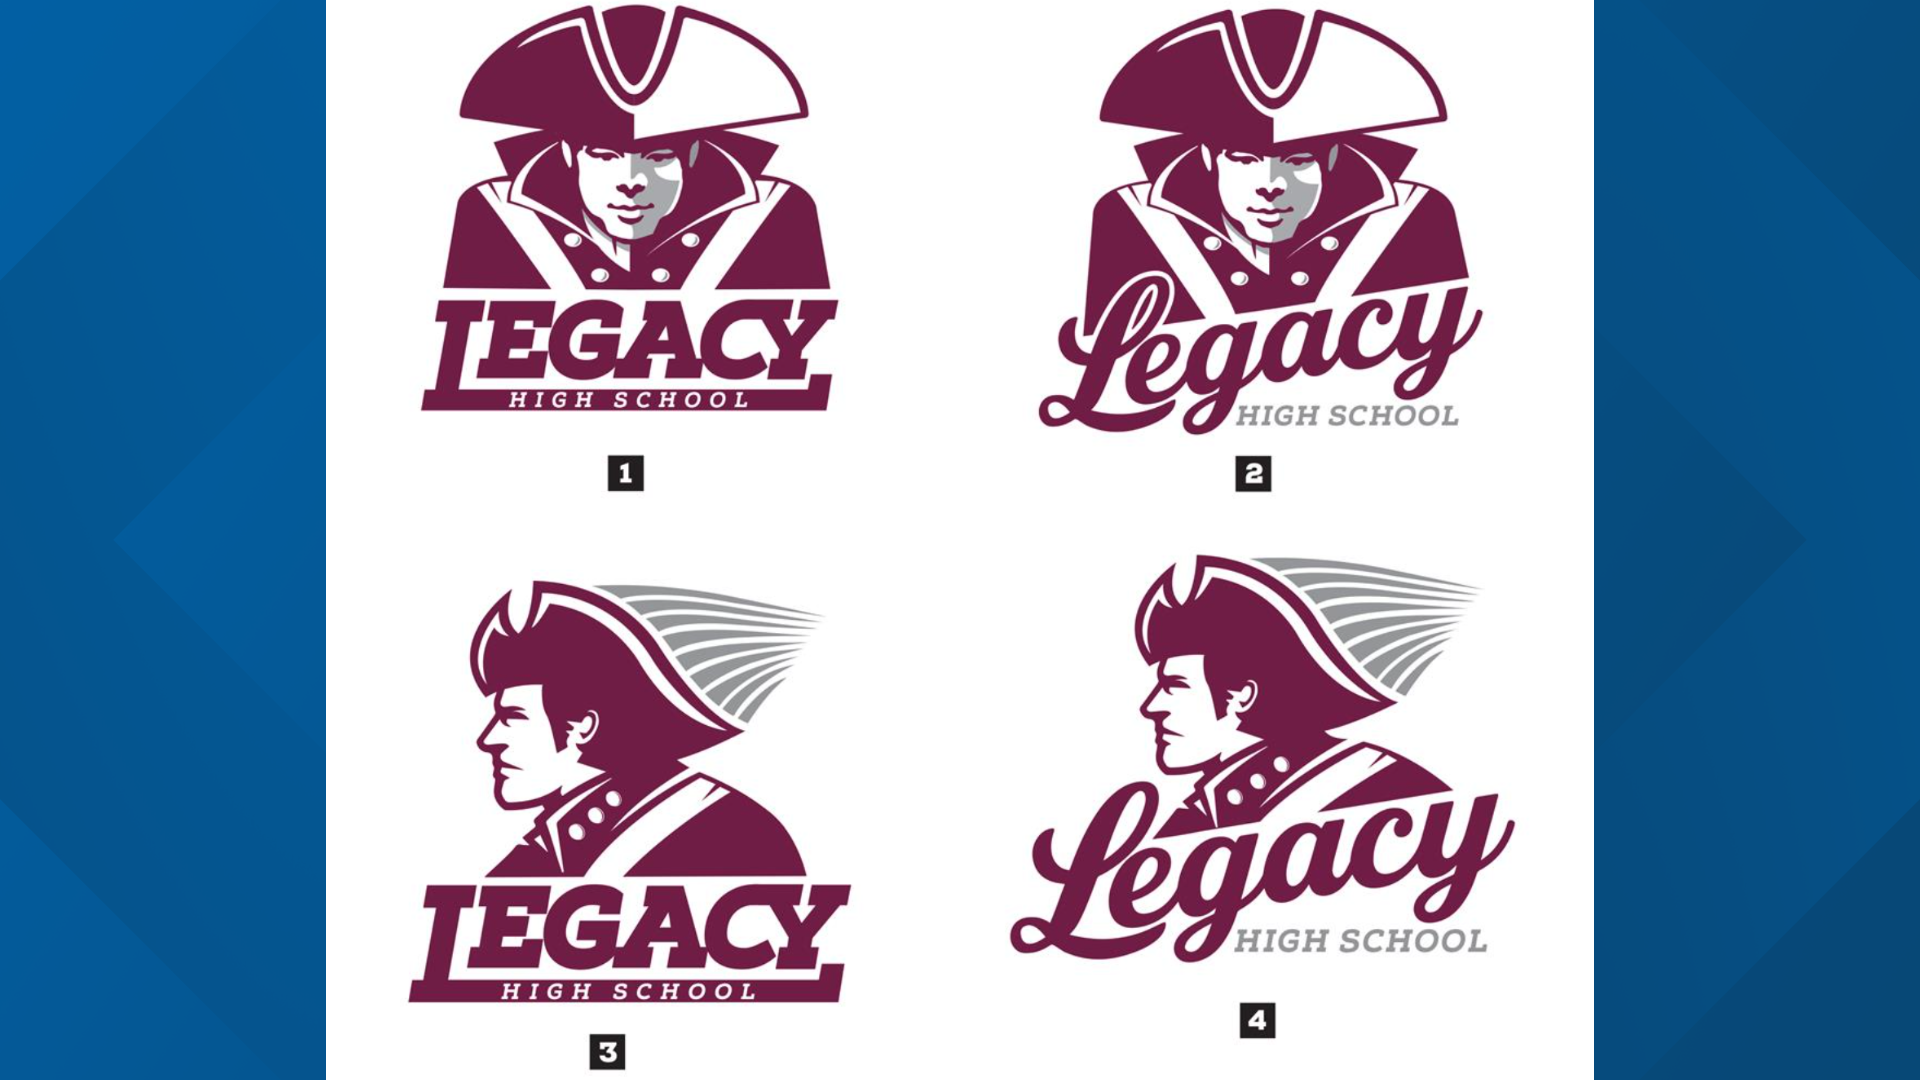 The former Lee High School Rebels mascot will be replaced by one of four student-inspired designs of Revolutionary War-era rebels.